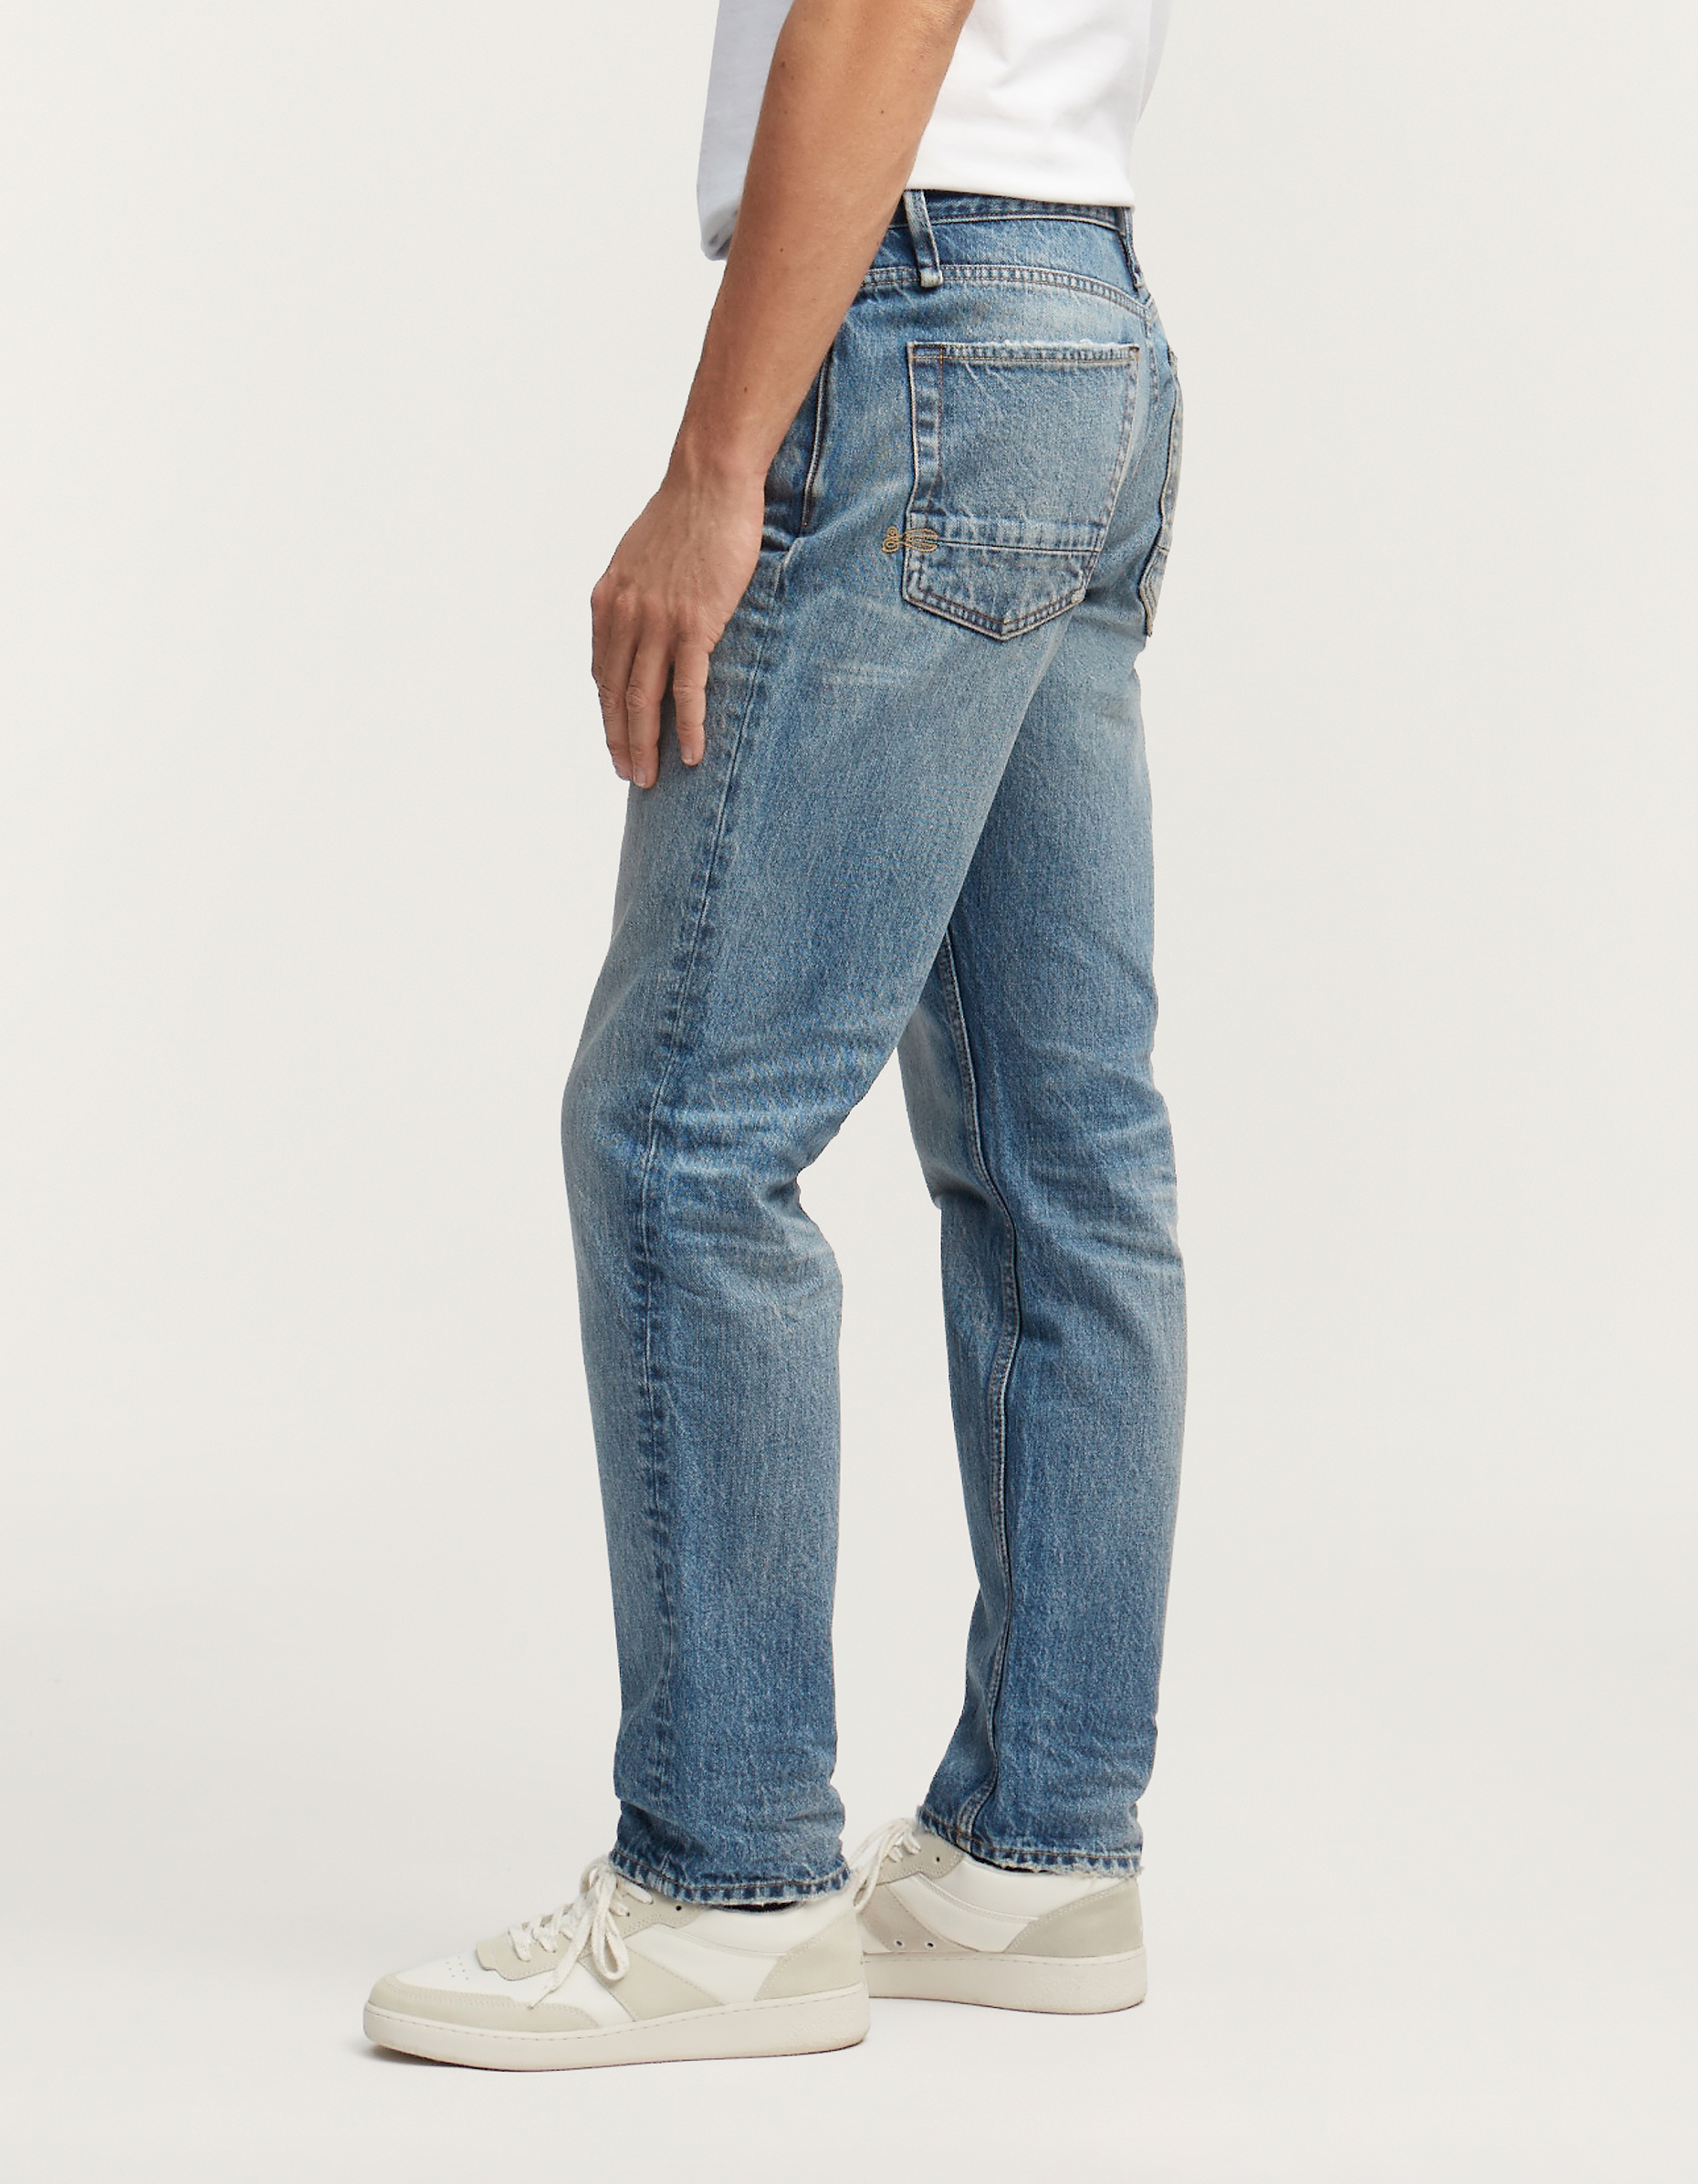 Tapered-fit mid stonewash selvedge jeans